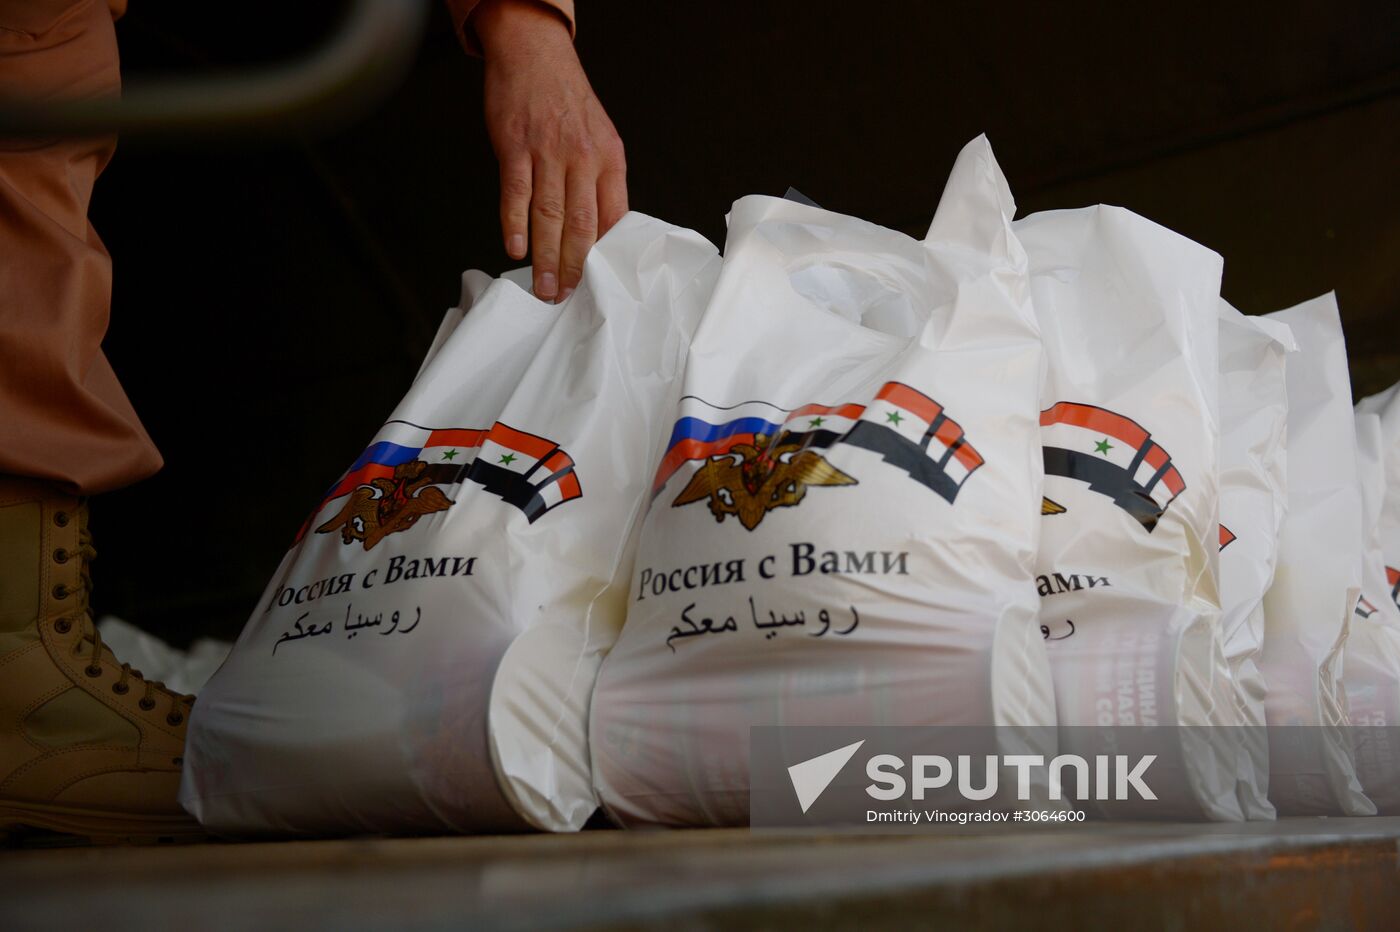 Syrian residents get Russian humanitarian relief aid